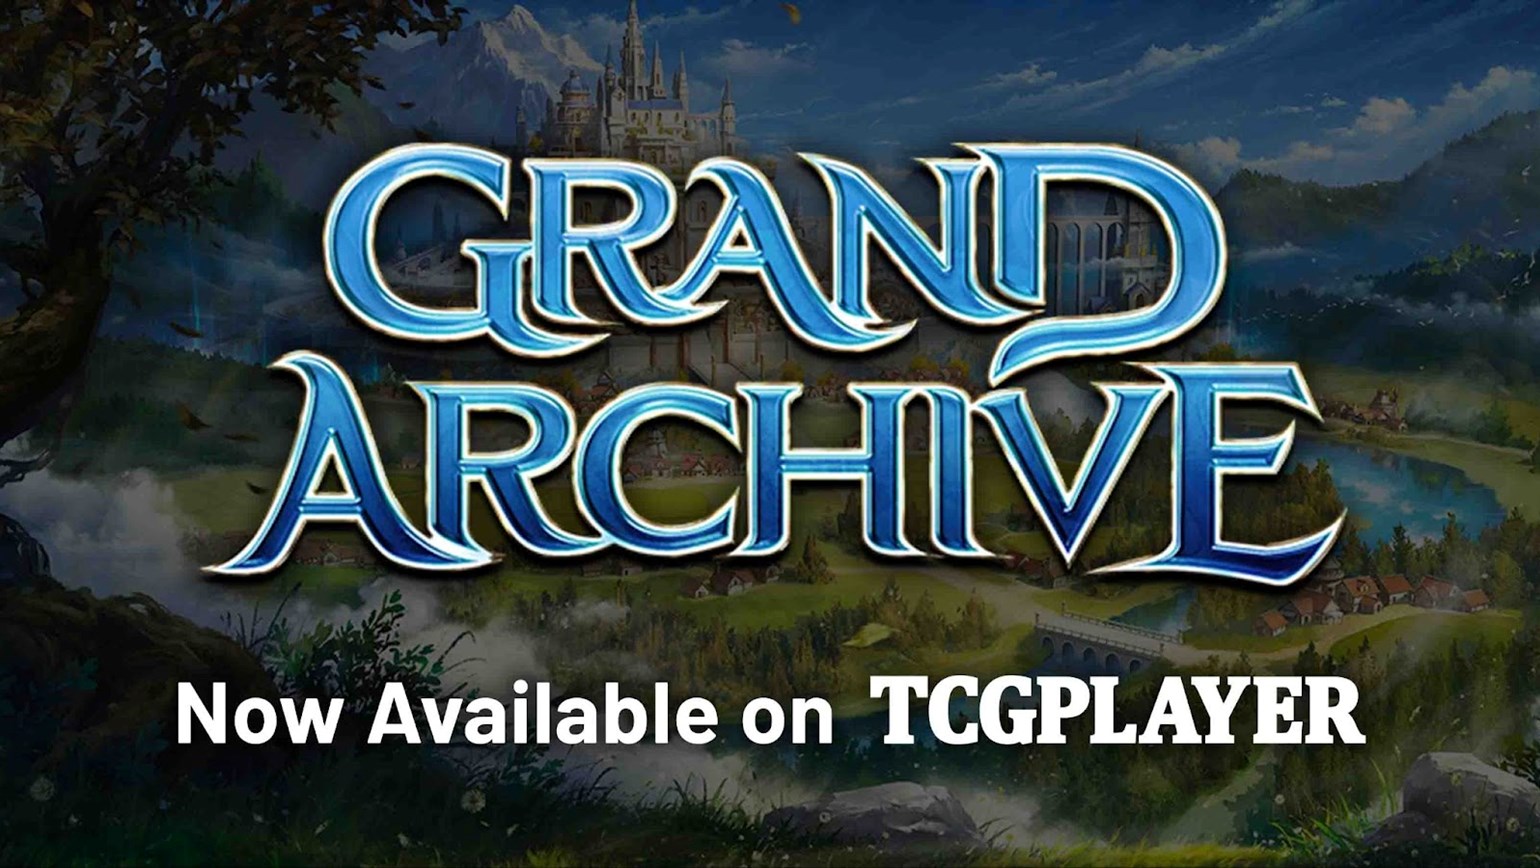 Now Available on TCGplayer: Grand Archive TCG